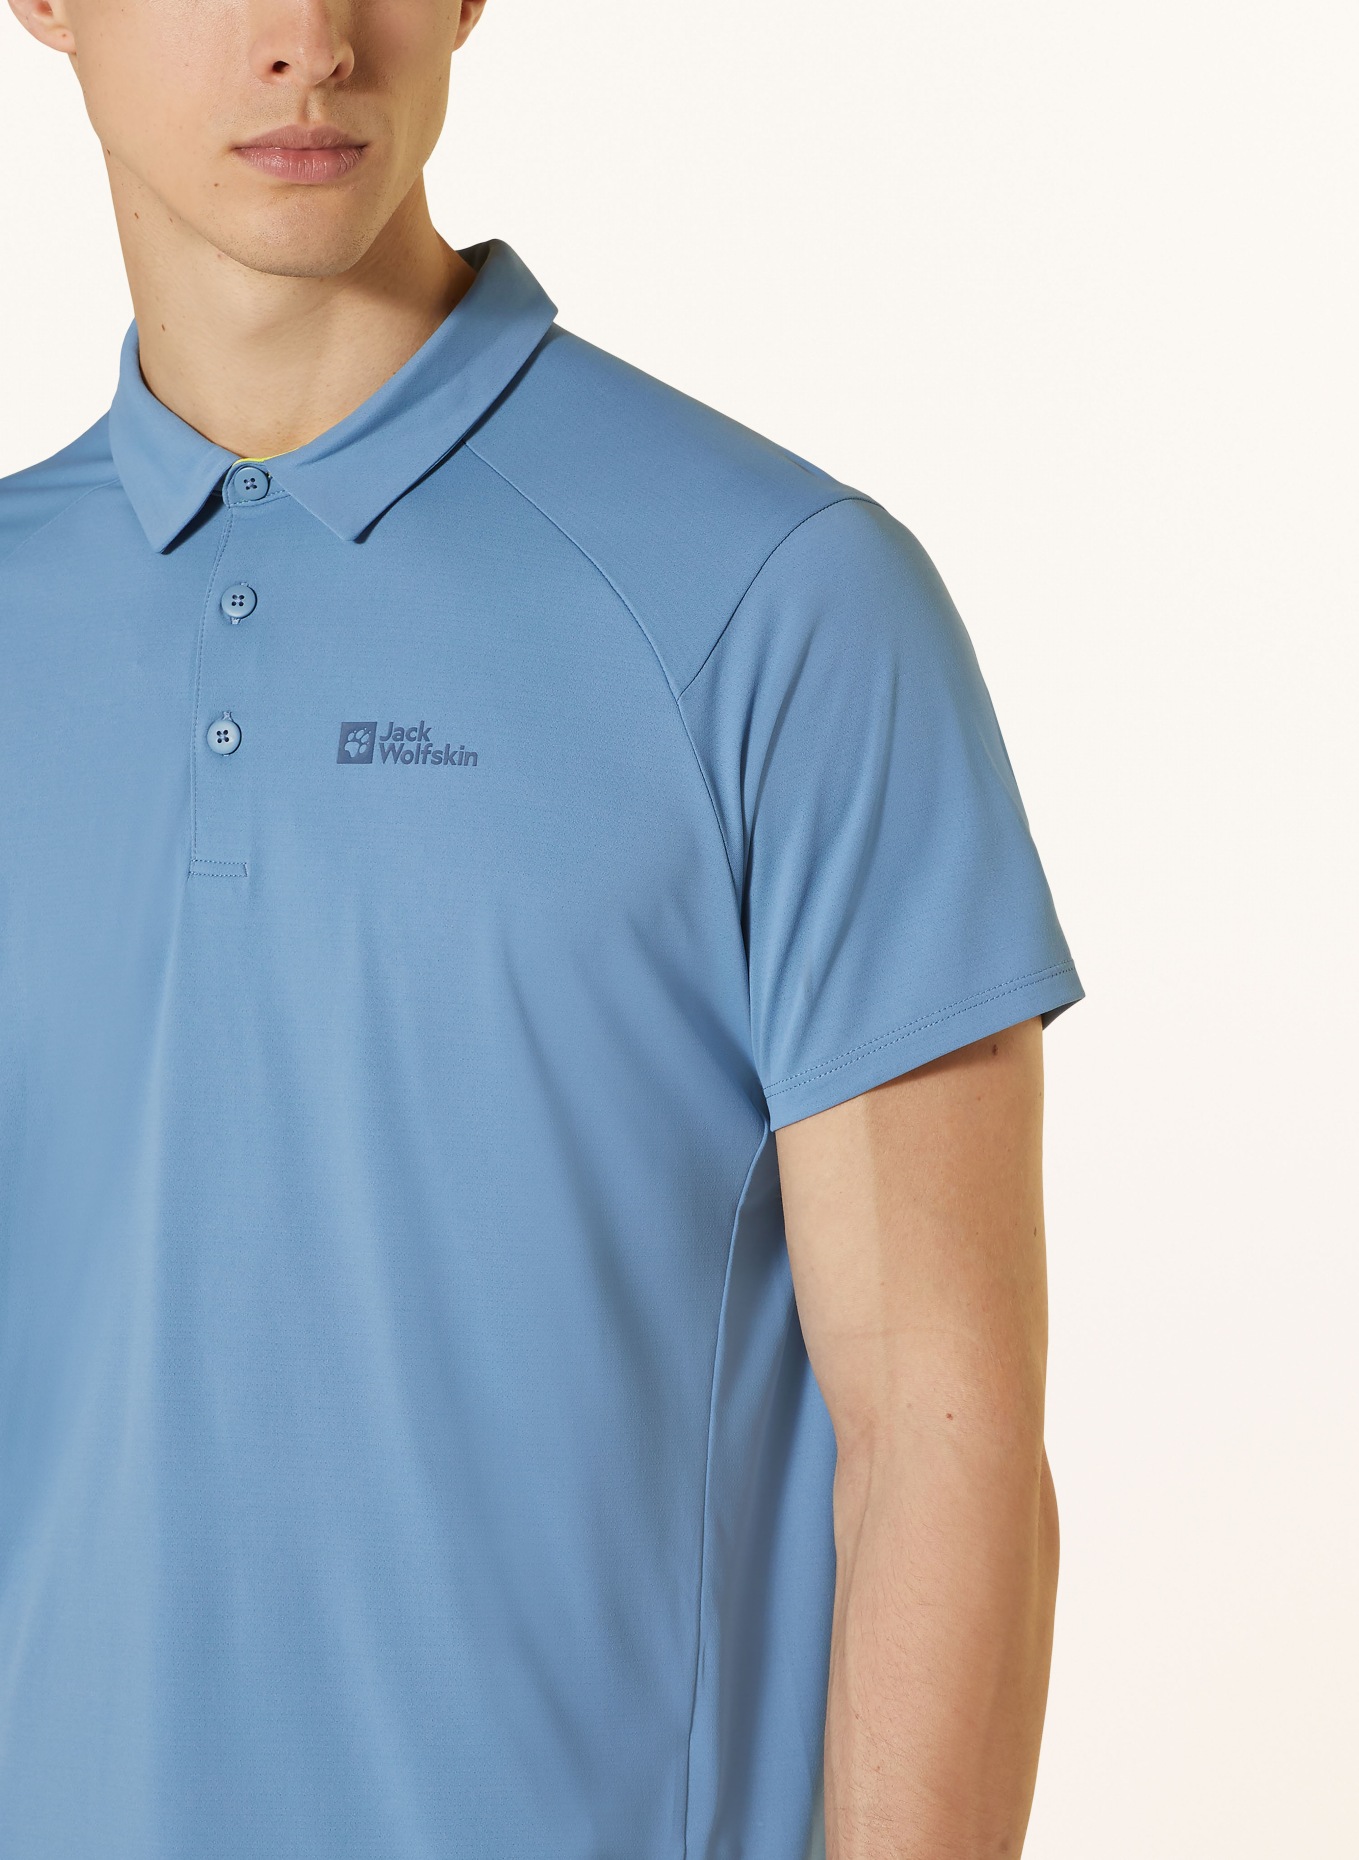 Jack Wolfskin Performance polo shirt PRELIGHT TRAIL, Color: BLUE (Image 4)